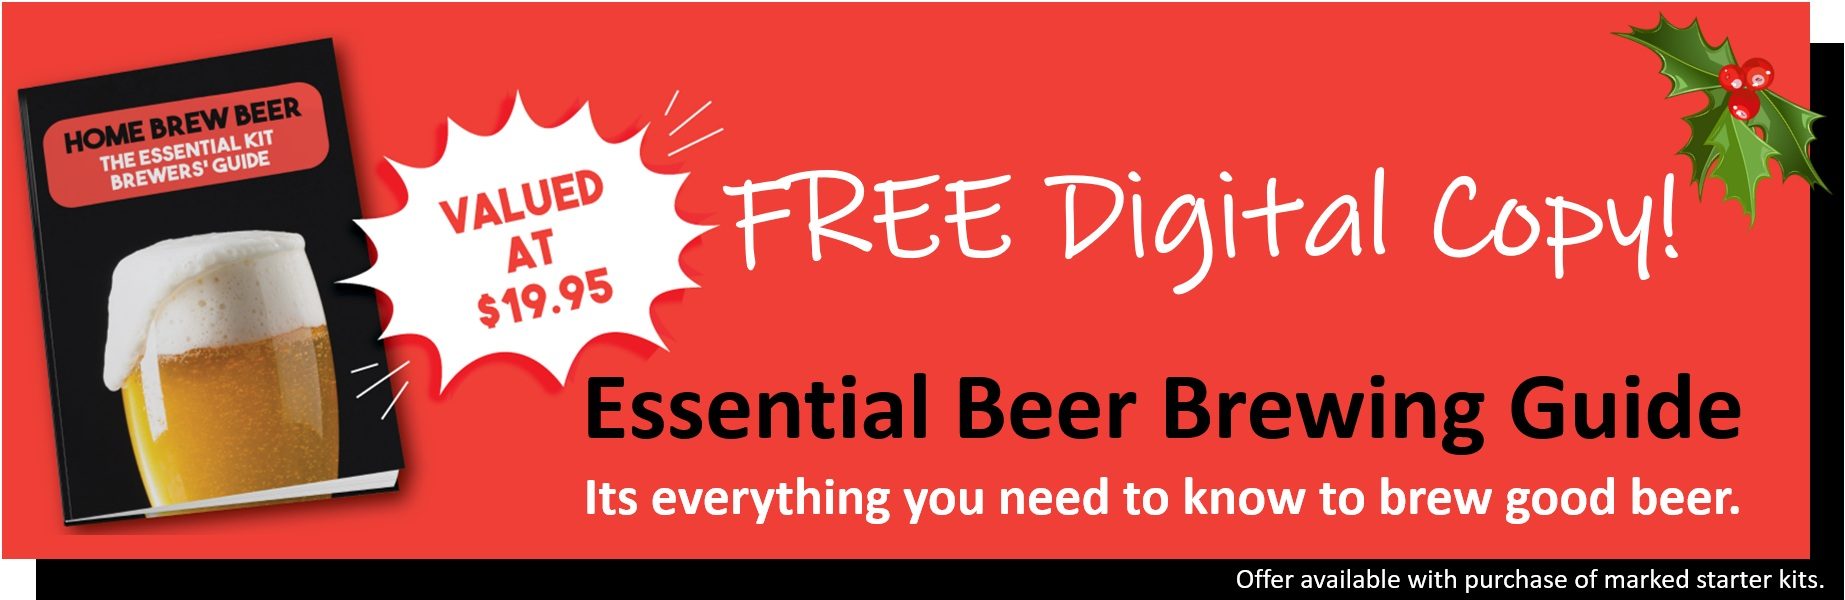 Essential Brewing Guide - Free Copy With Home Brew Gift Purchase